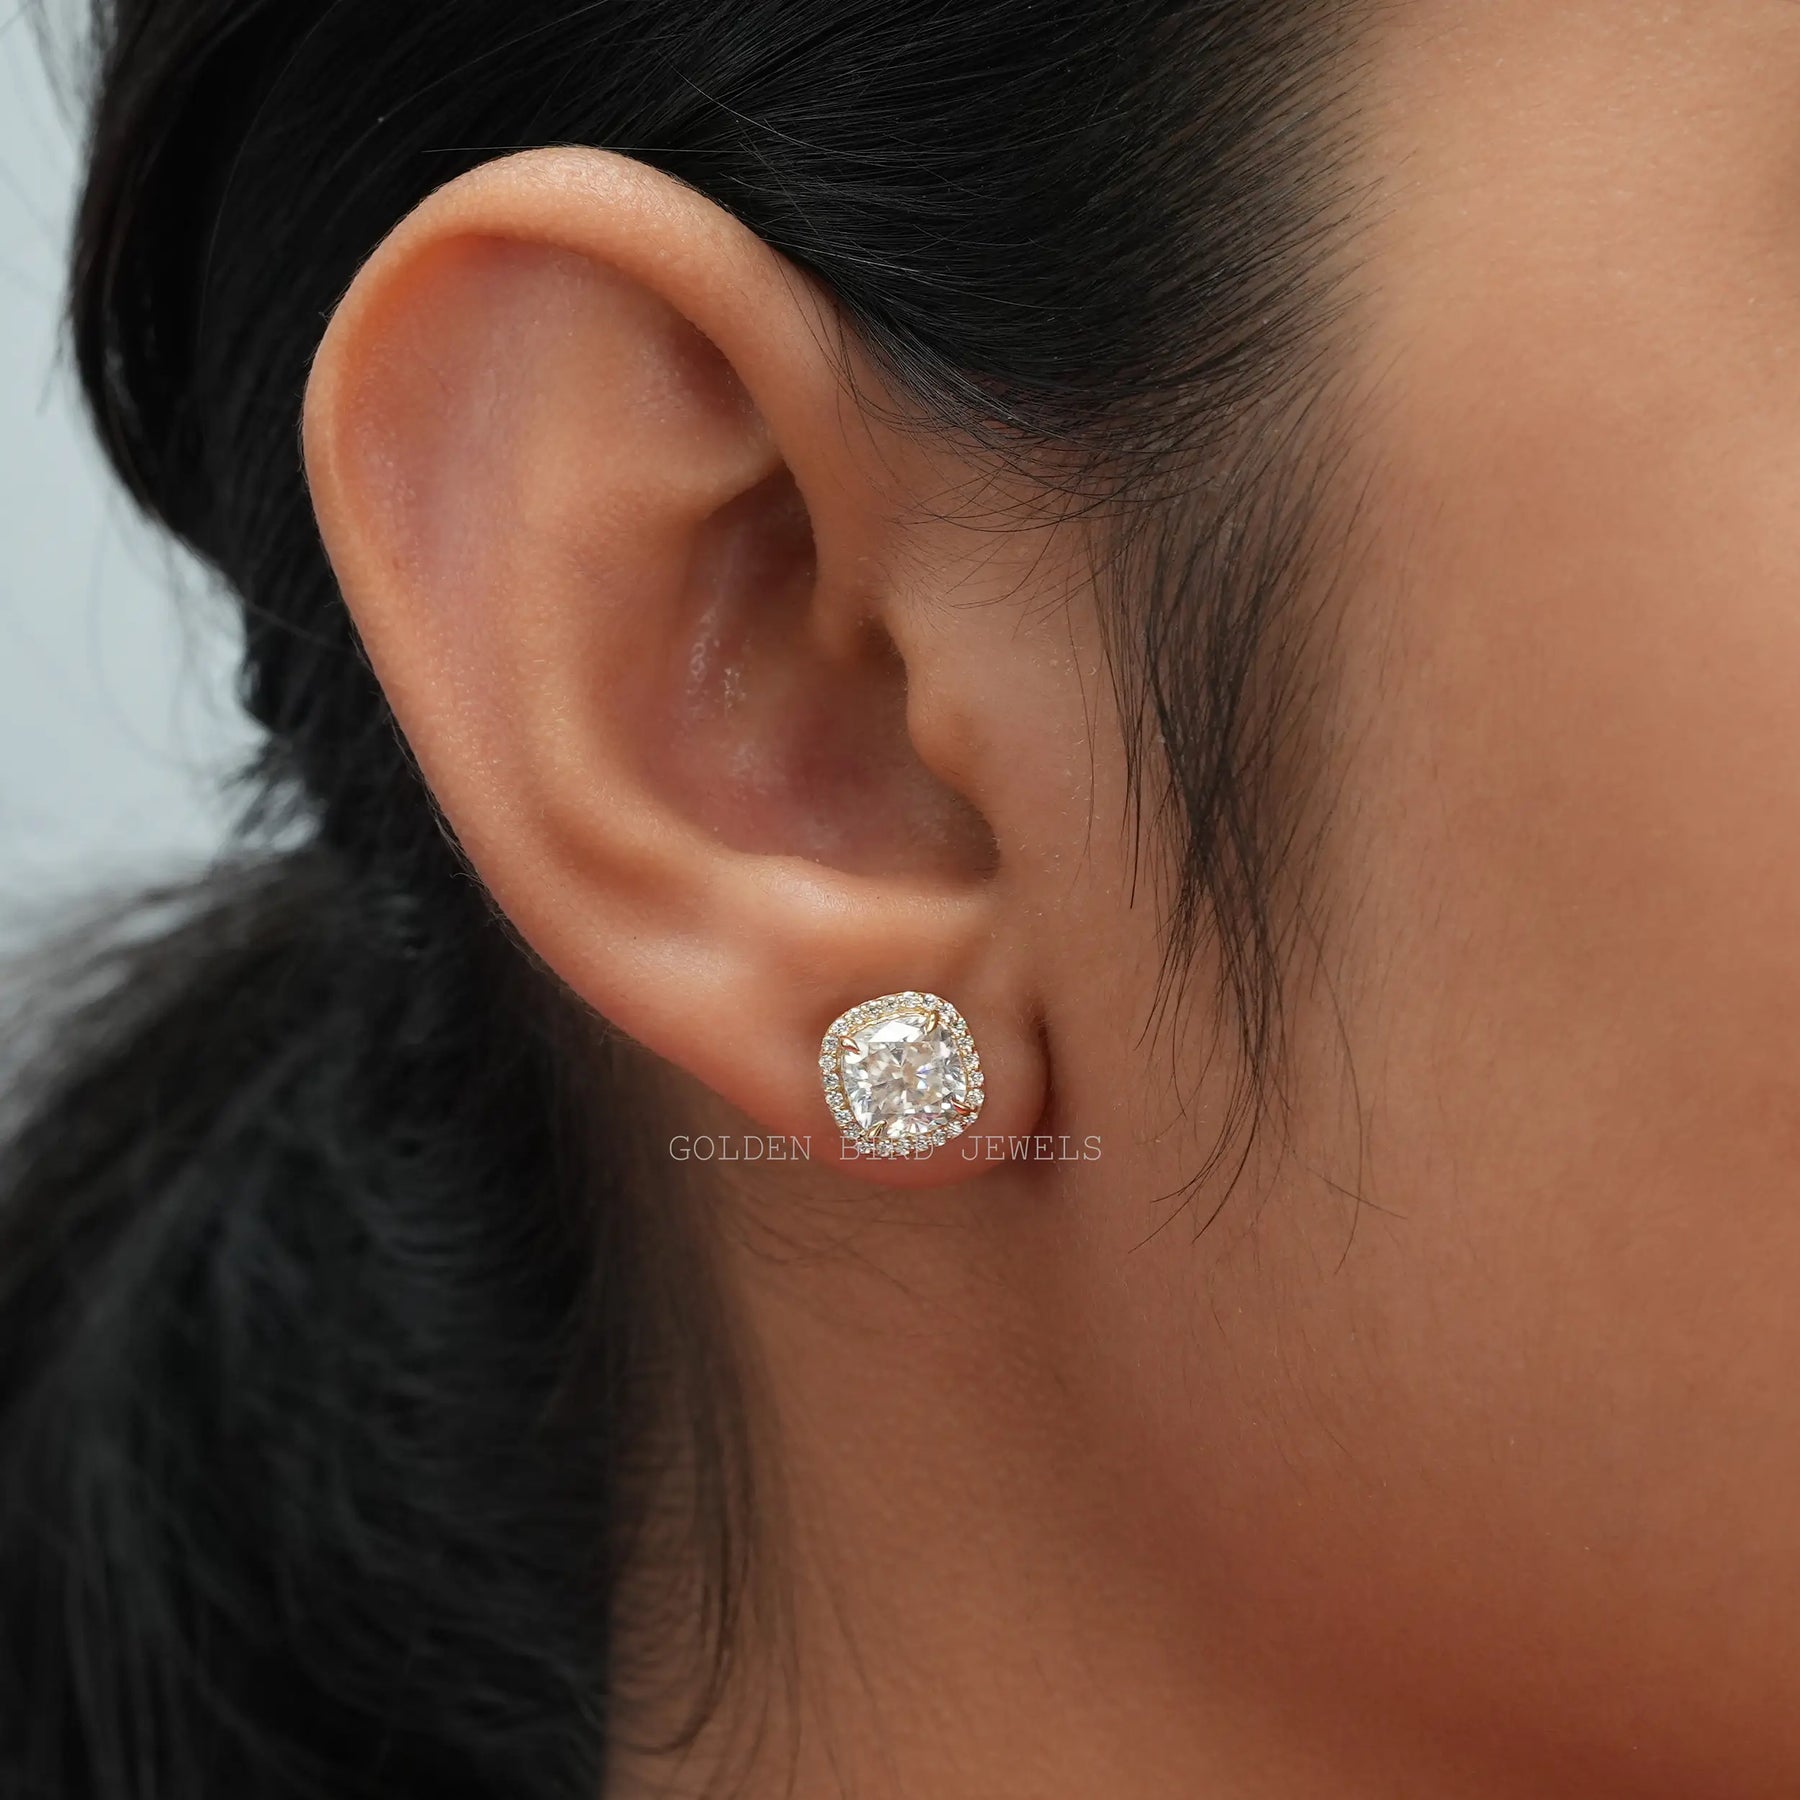 [In ear front view of cushion cut halo stud earrings made of round cut side stones]-[Golden Bird Jewels]